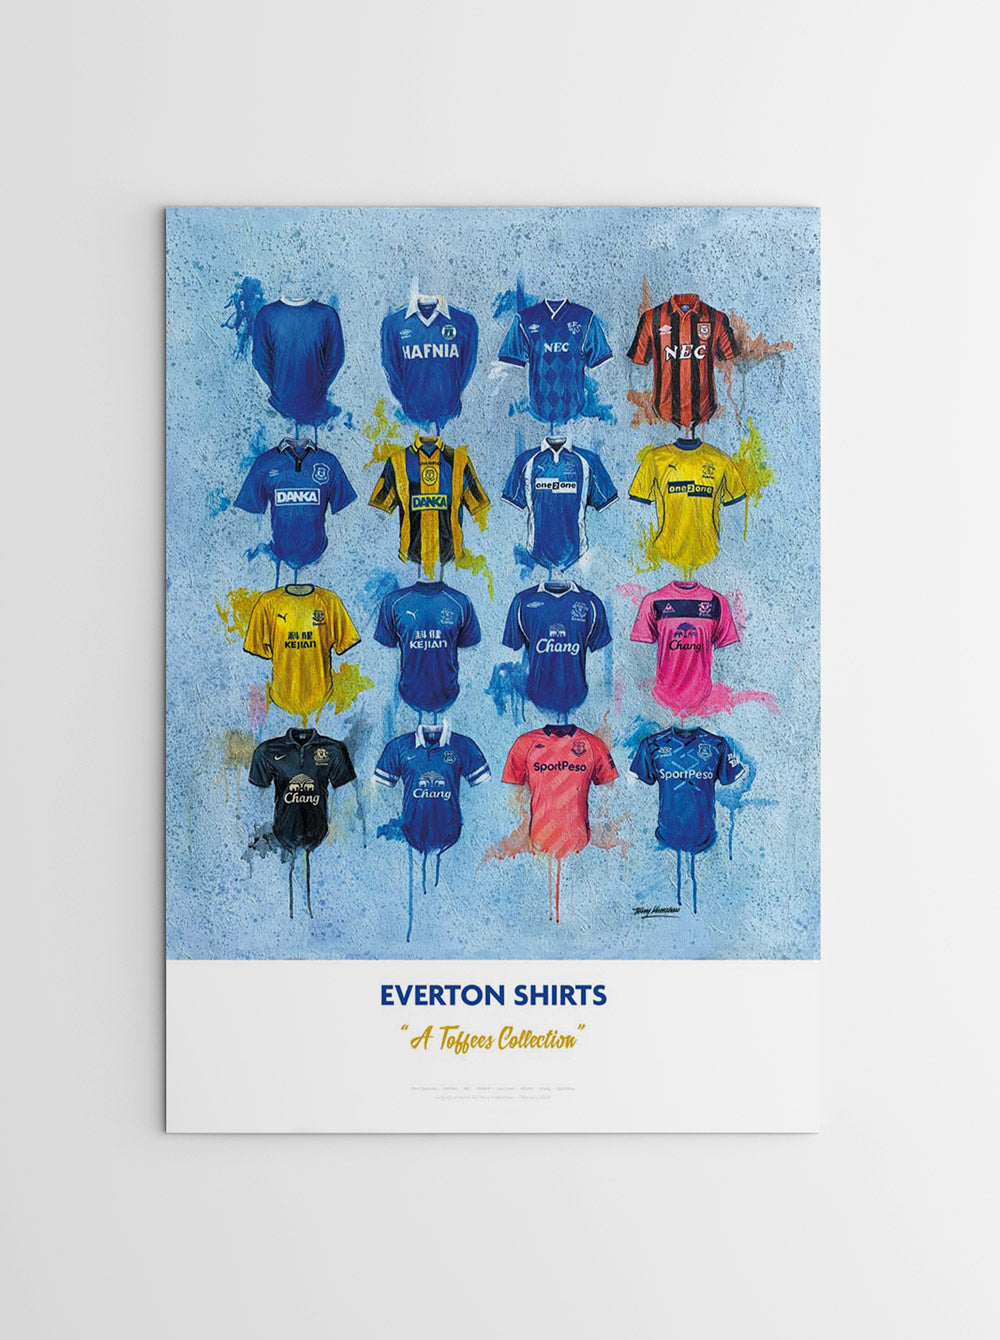 This is a limited edition A2 print featuring 16 iconic Everton team shirts. Each shirt is arranged in a grid pattern, with a personalized name and number printed below each one. The artwork, created by Terry Kneeshaw, celebrates some of Everton's most memorable kits from throughout the years. This print would be a great addition to any Everton fan's collection and serves as a tribute to the club's rich history and legacy.